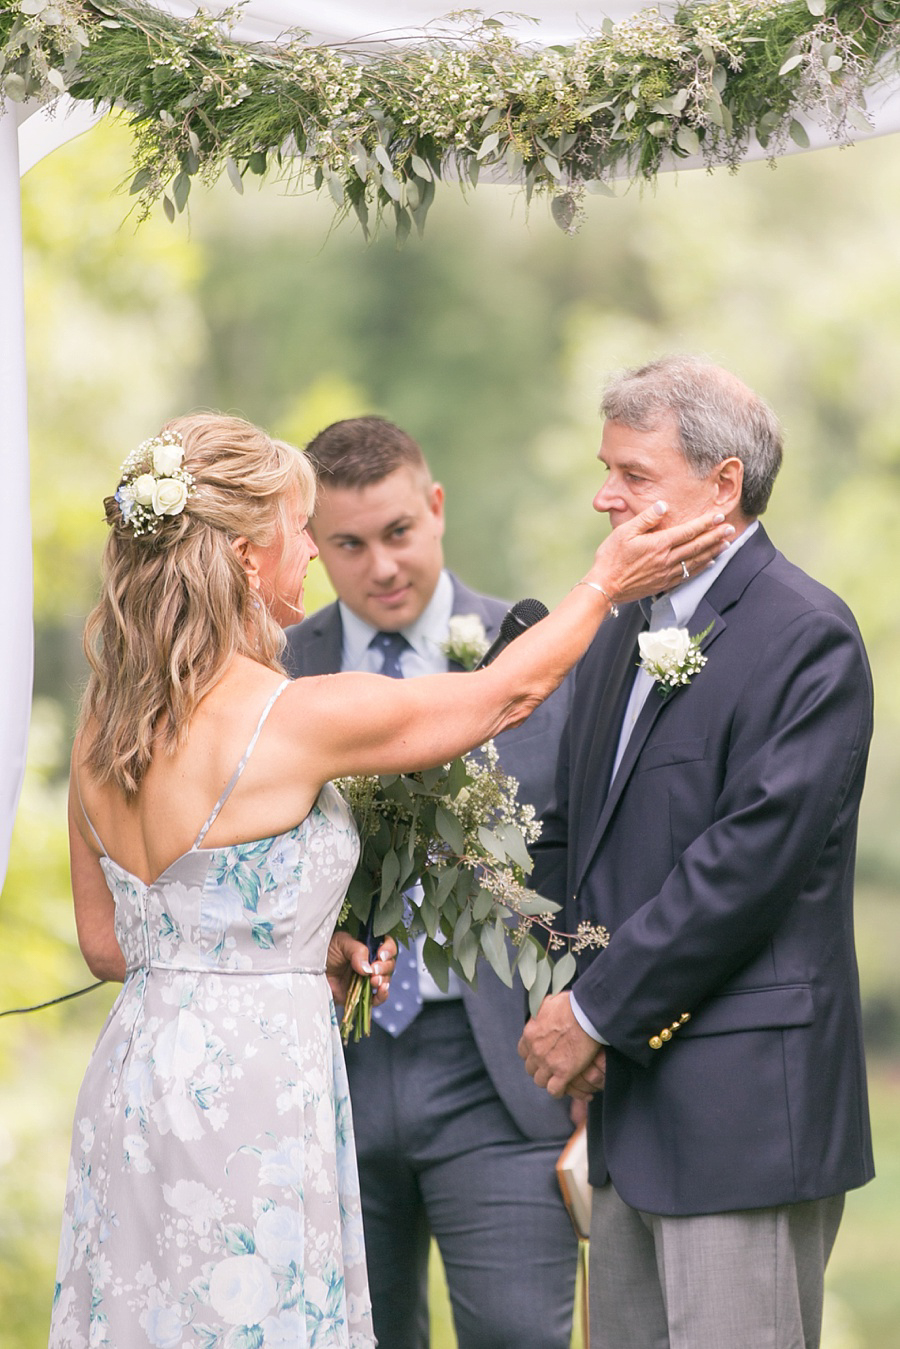 Private Estate Wedding Photographer- Amy Rizzuto Photography-20